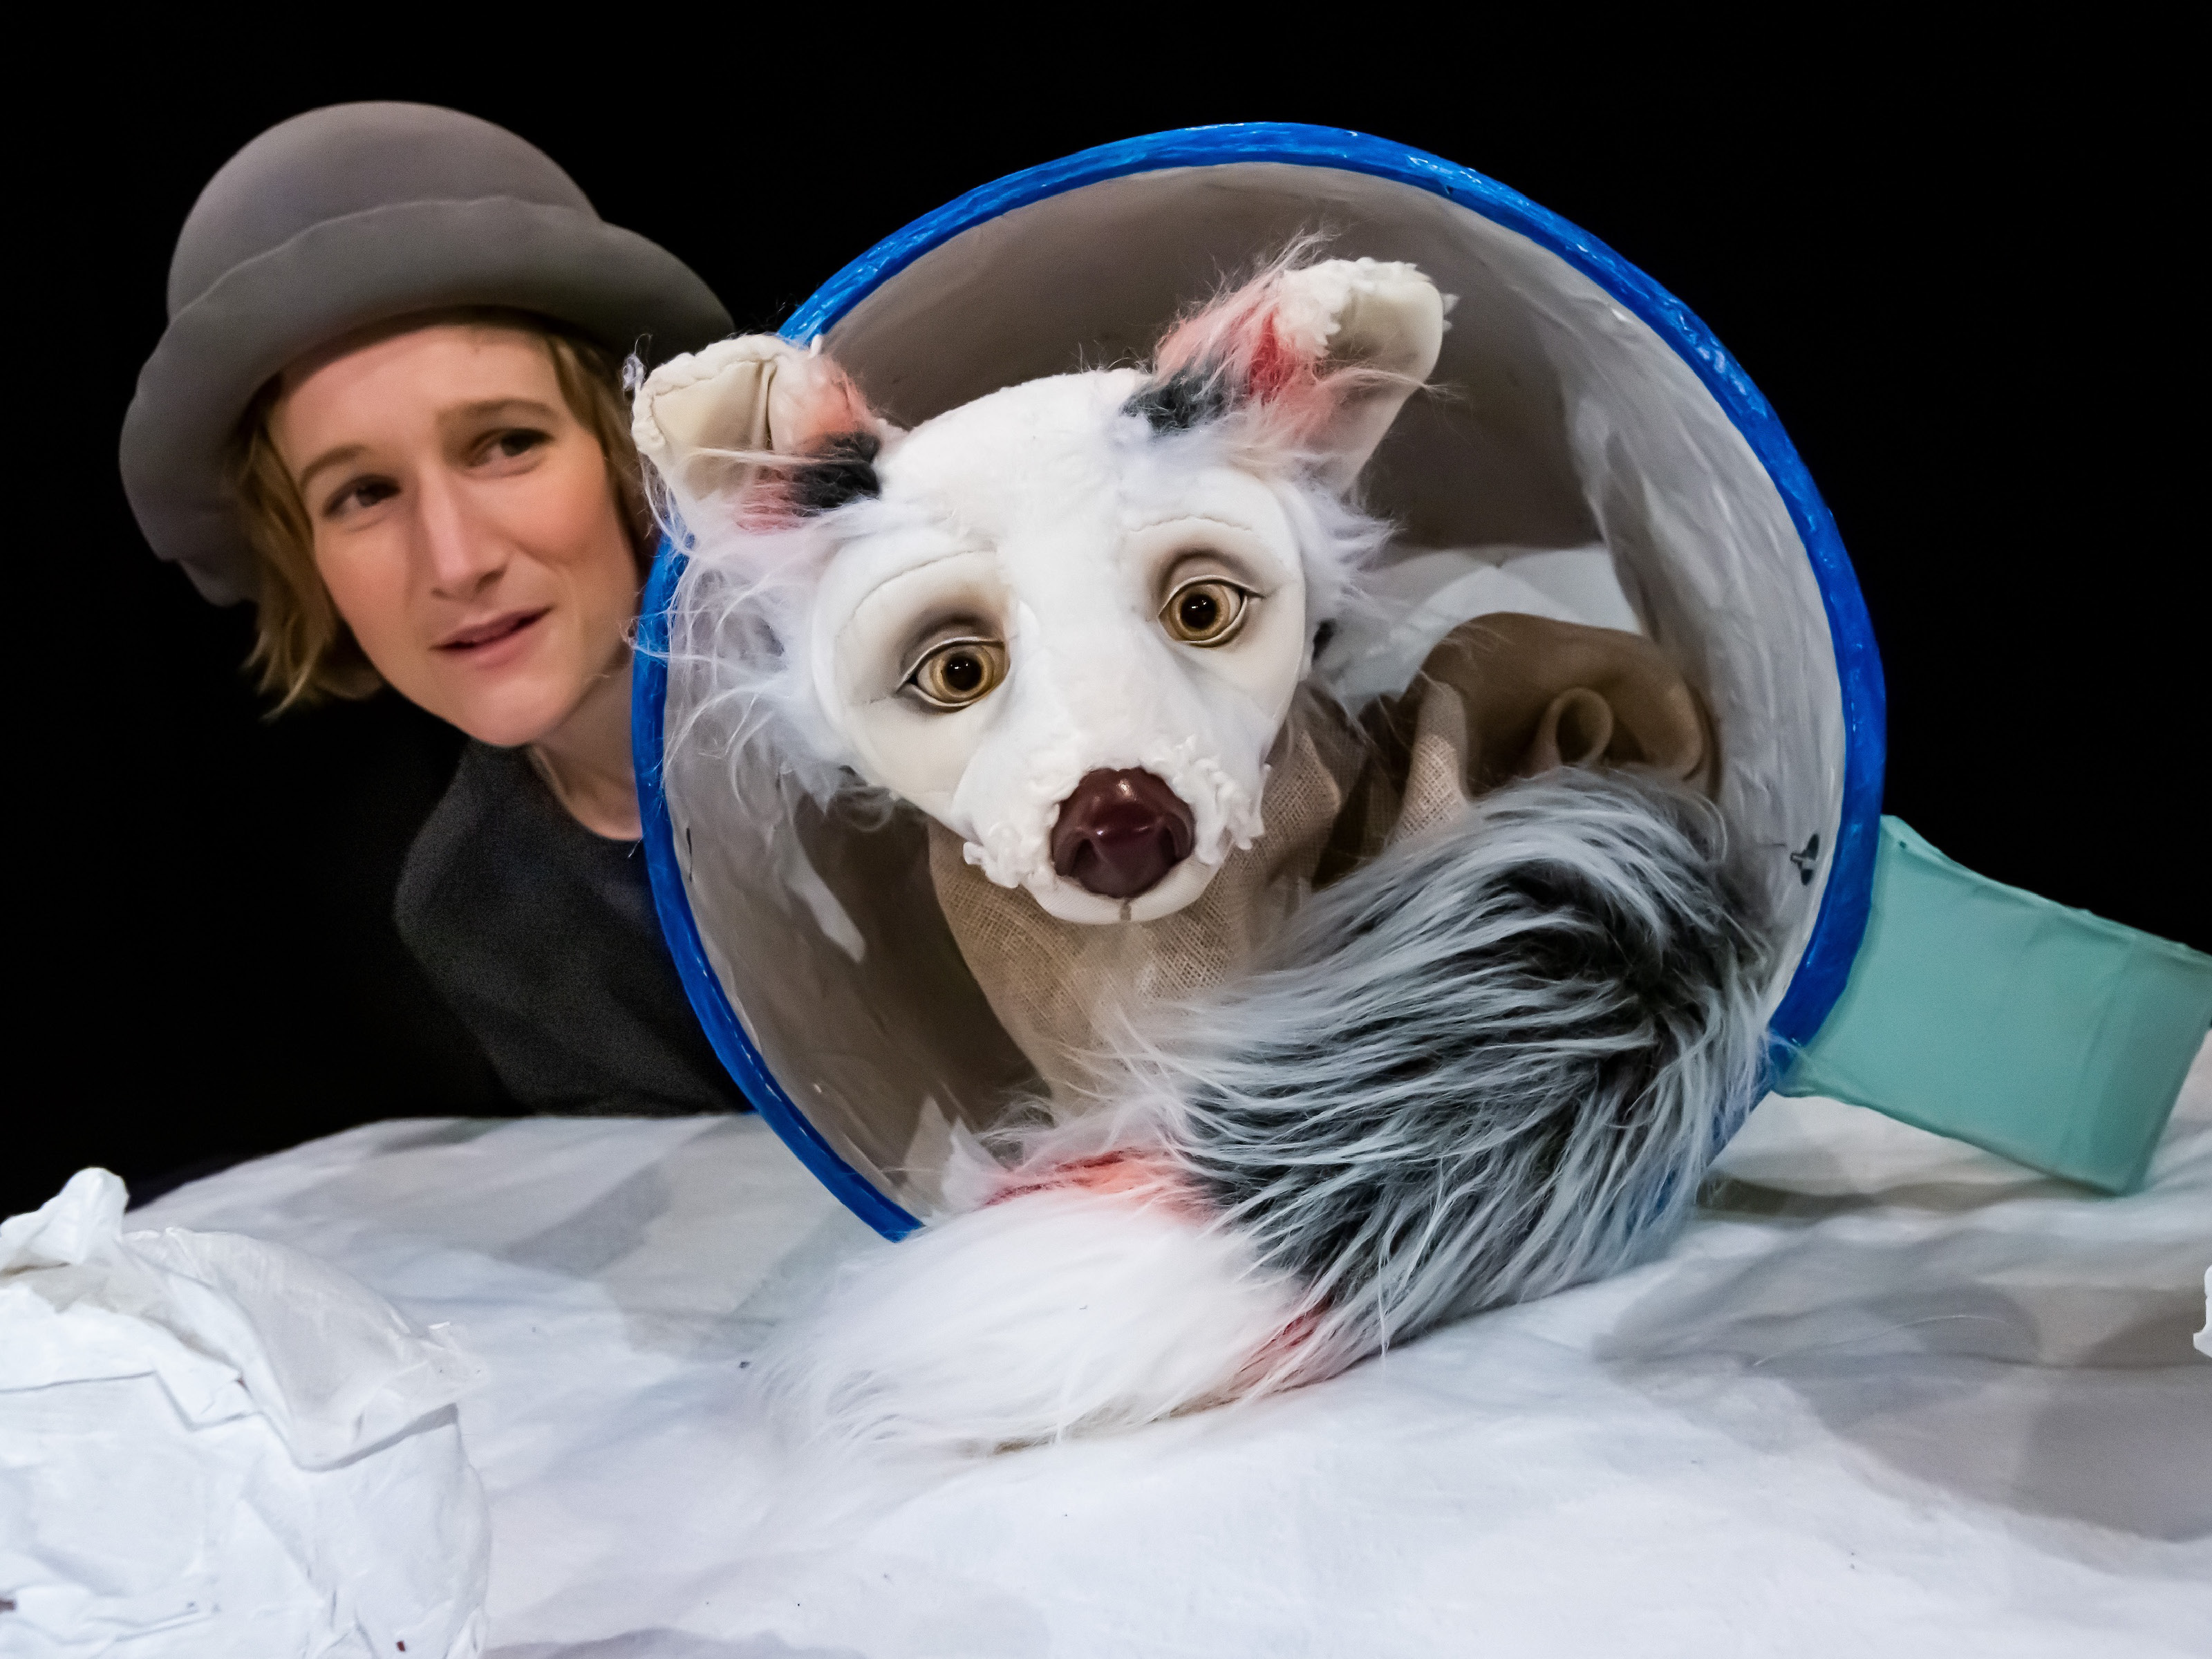 The doll figure of an arctic fox sits curled up in a giant cup. Behind the cup is the player Miriam Hesse. She is wearing a gray hat.